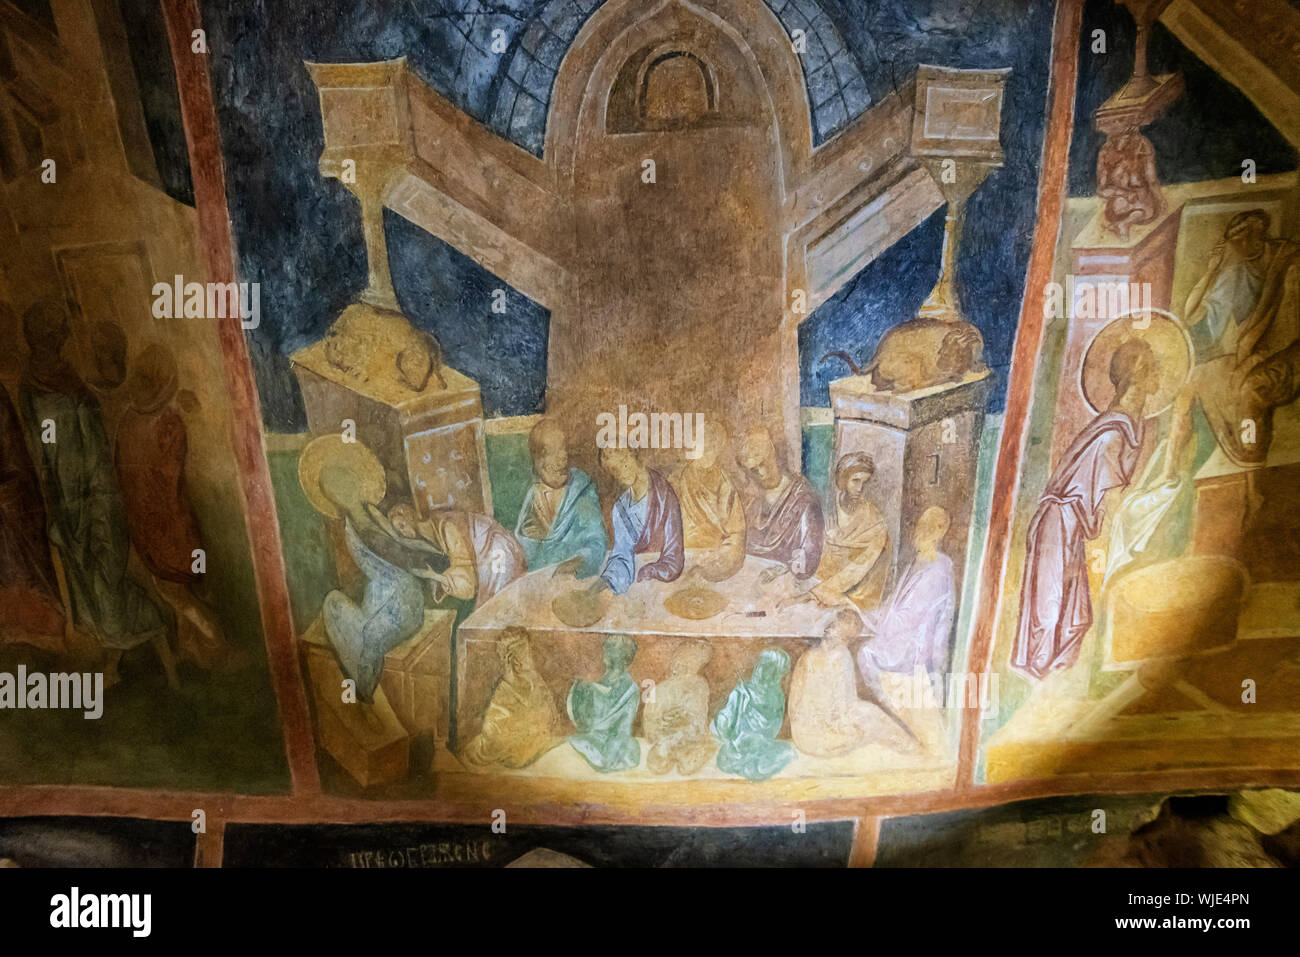 The frescoes inside the church of the rock-hewn Ivanovo Monastery were made during the 14th century. A UNESCO World Heritage Site. Bulgaria Stock Photo